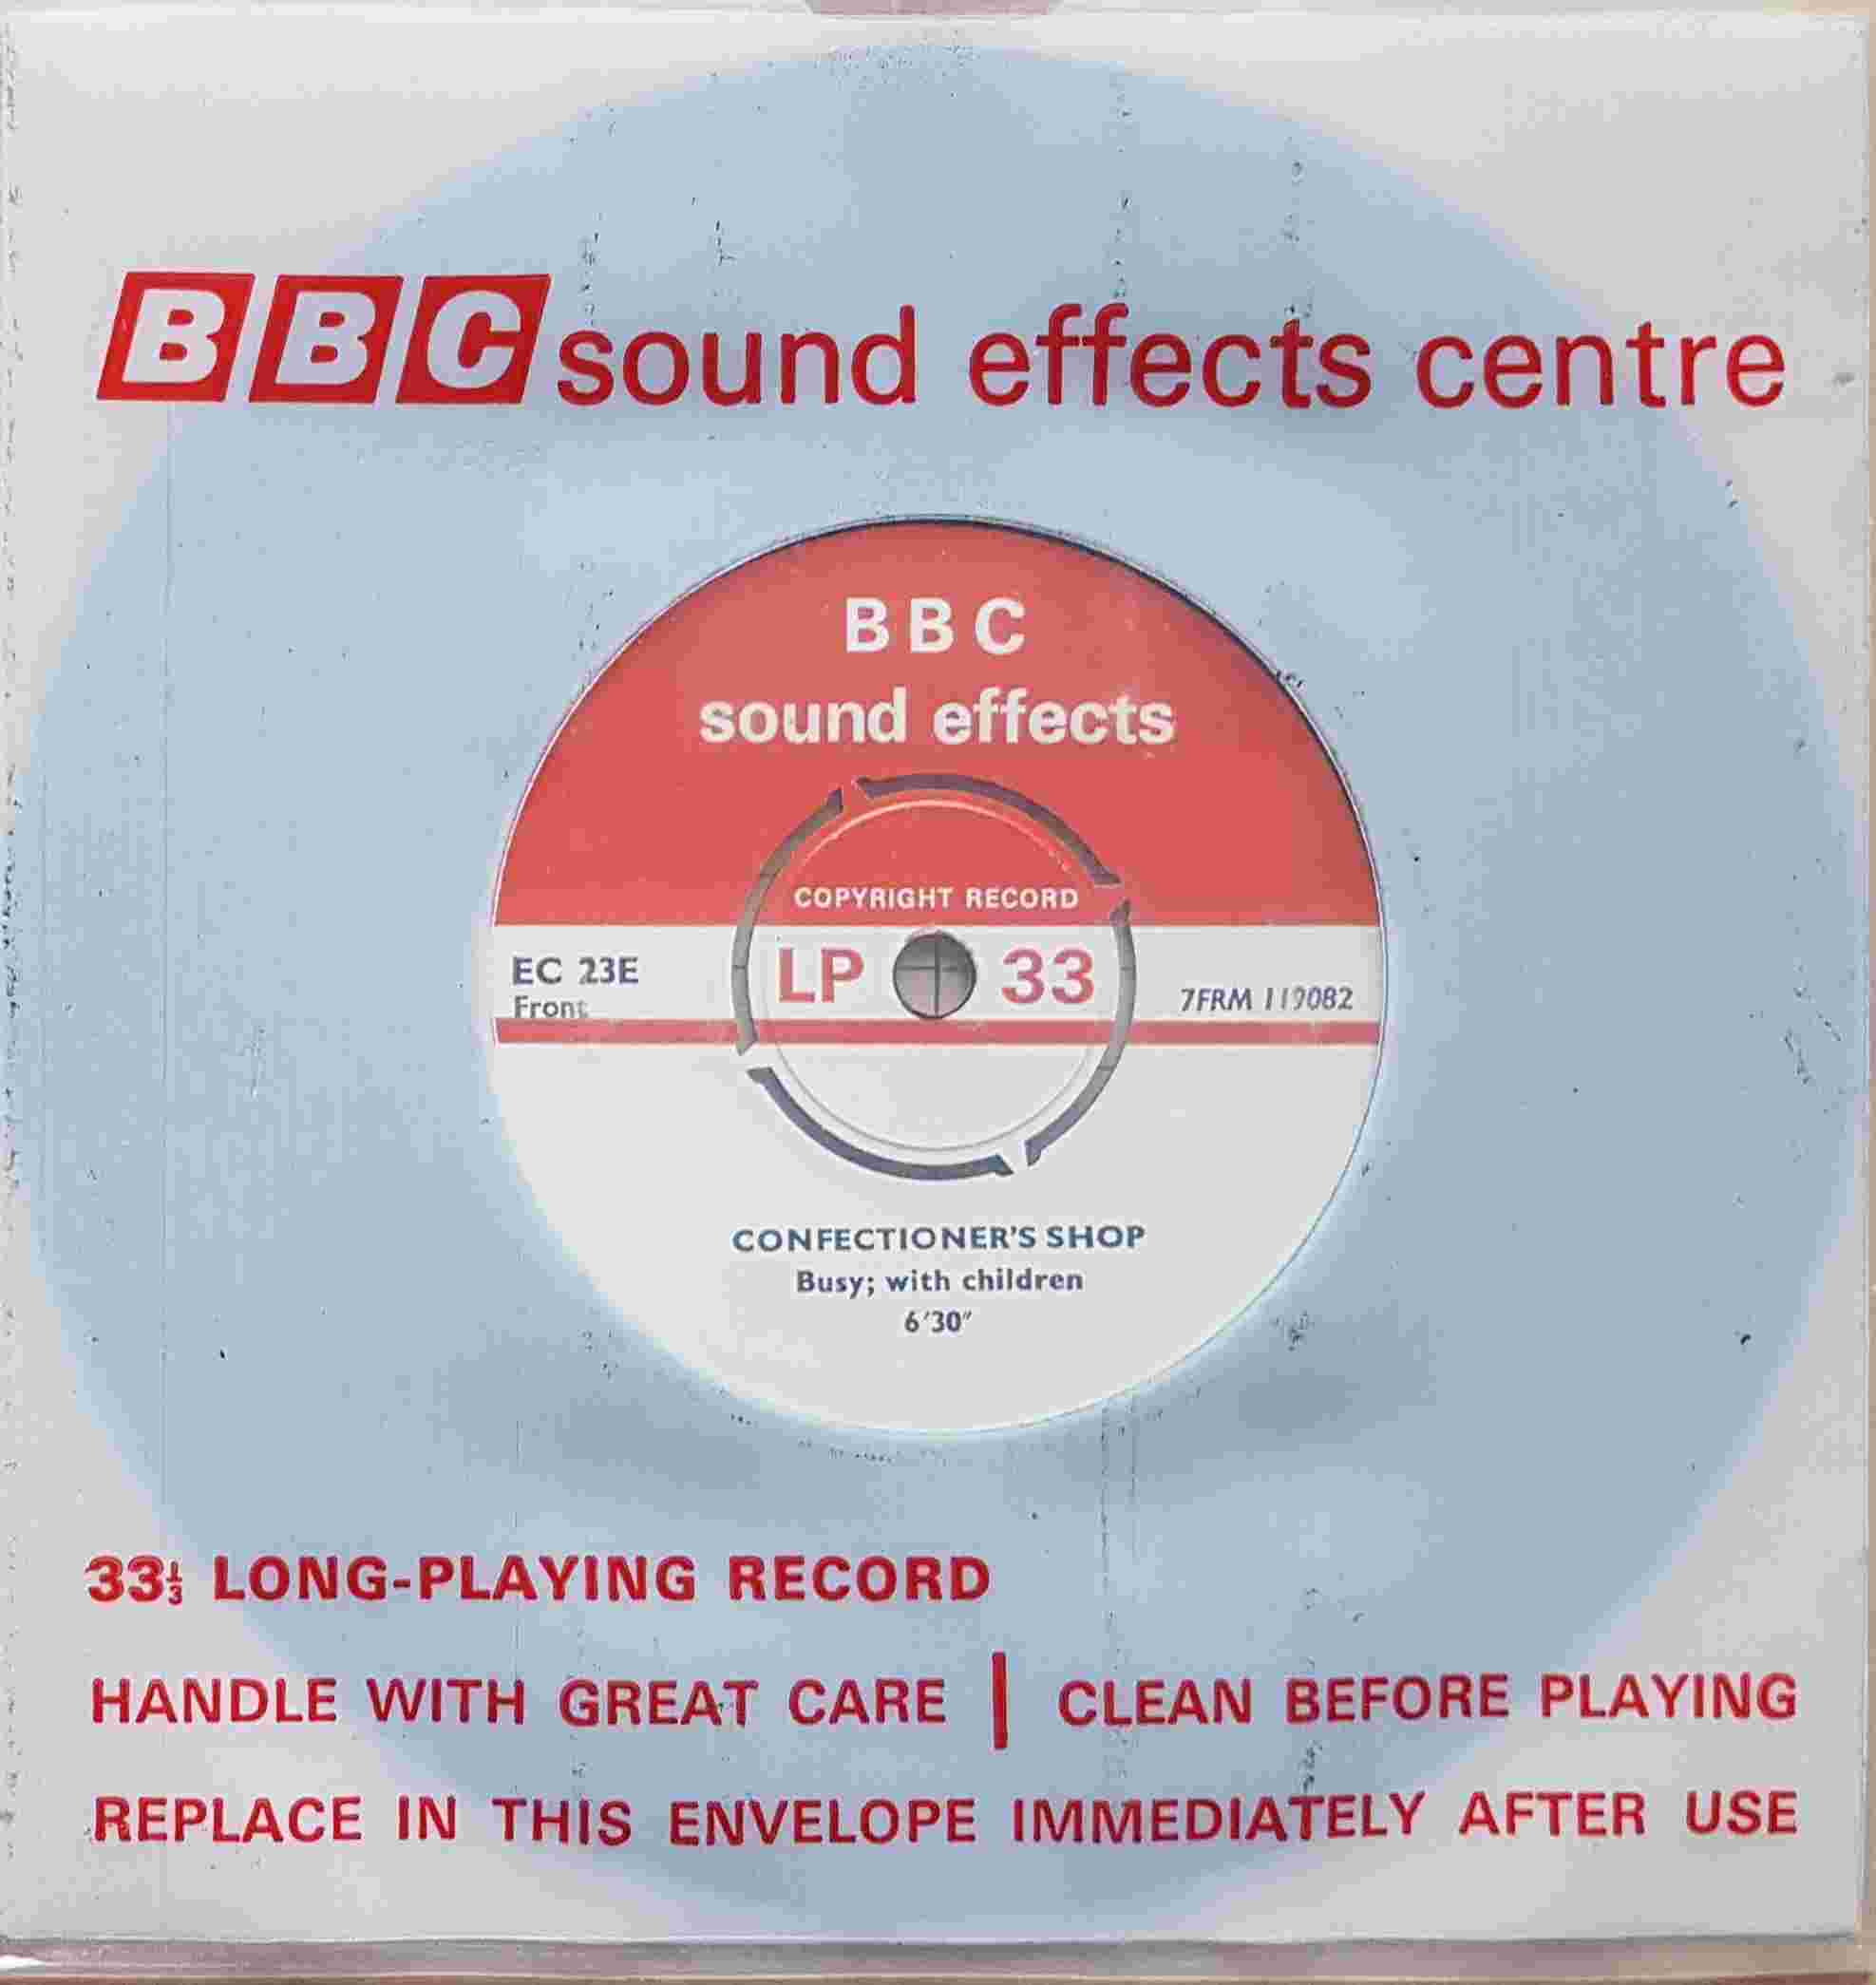 Picture of EC 23E Confectioner's shop & Newsagent / Confectioner's shop by artist Not registered from the BBC singles - Records and Tapes library